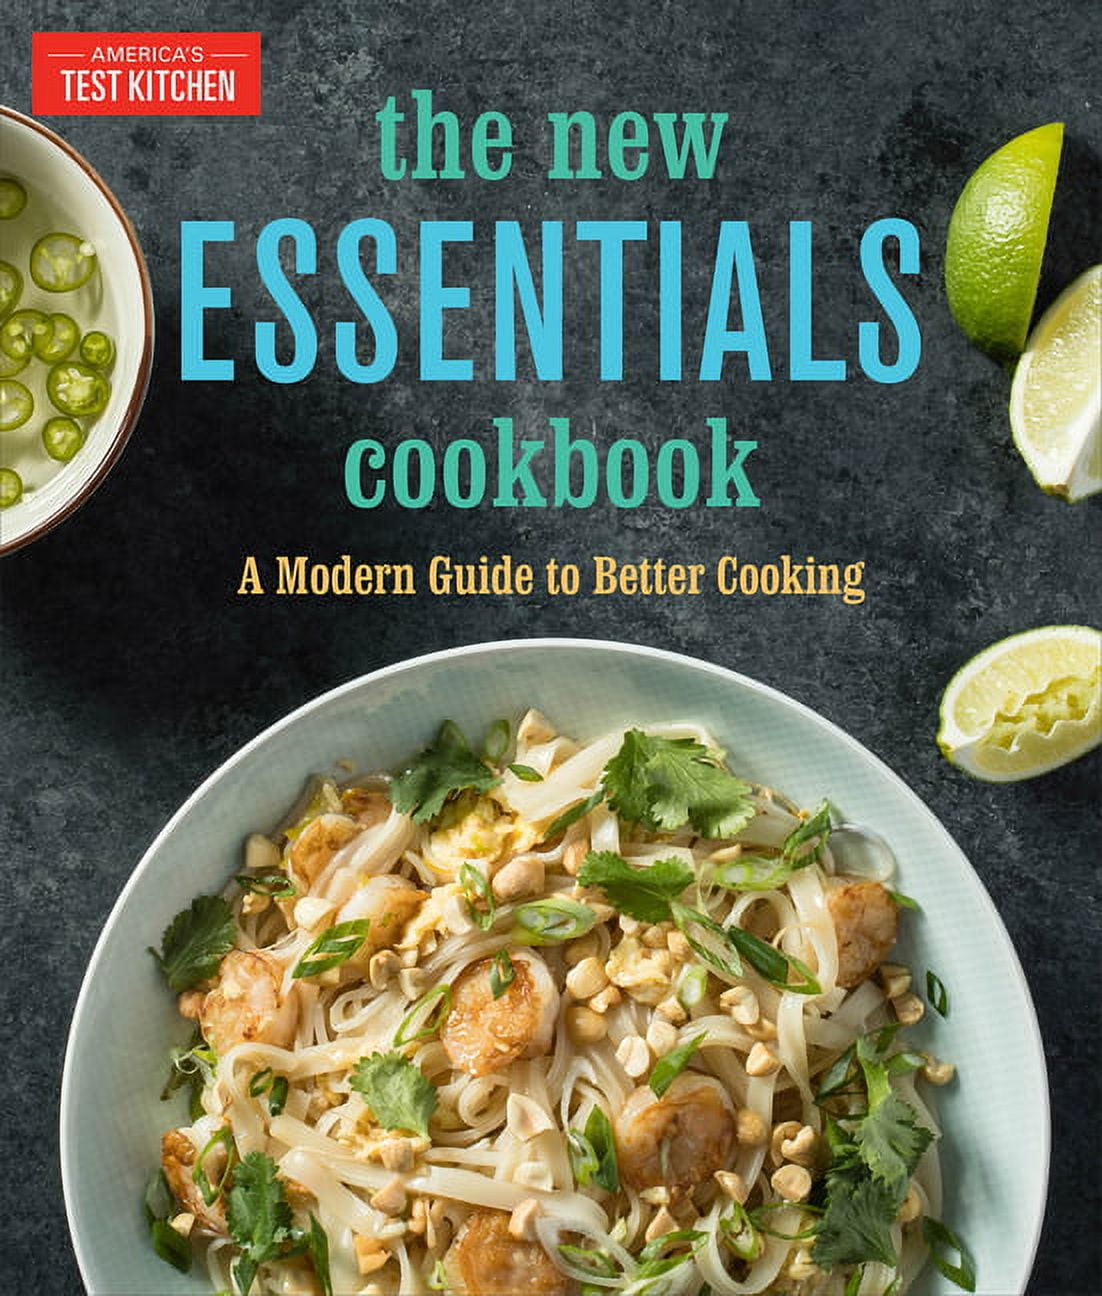 Kitchen Essentials Guide, Cooking For One